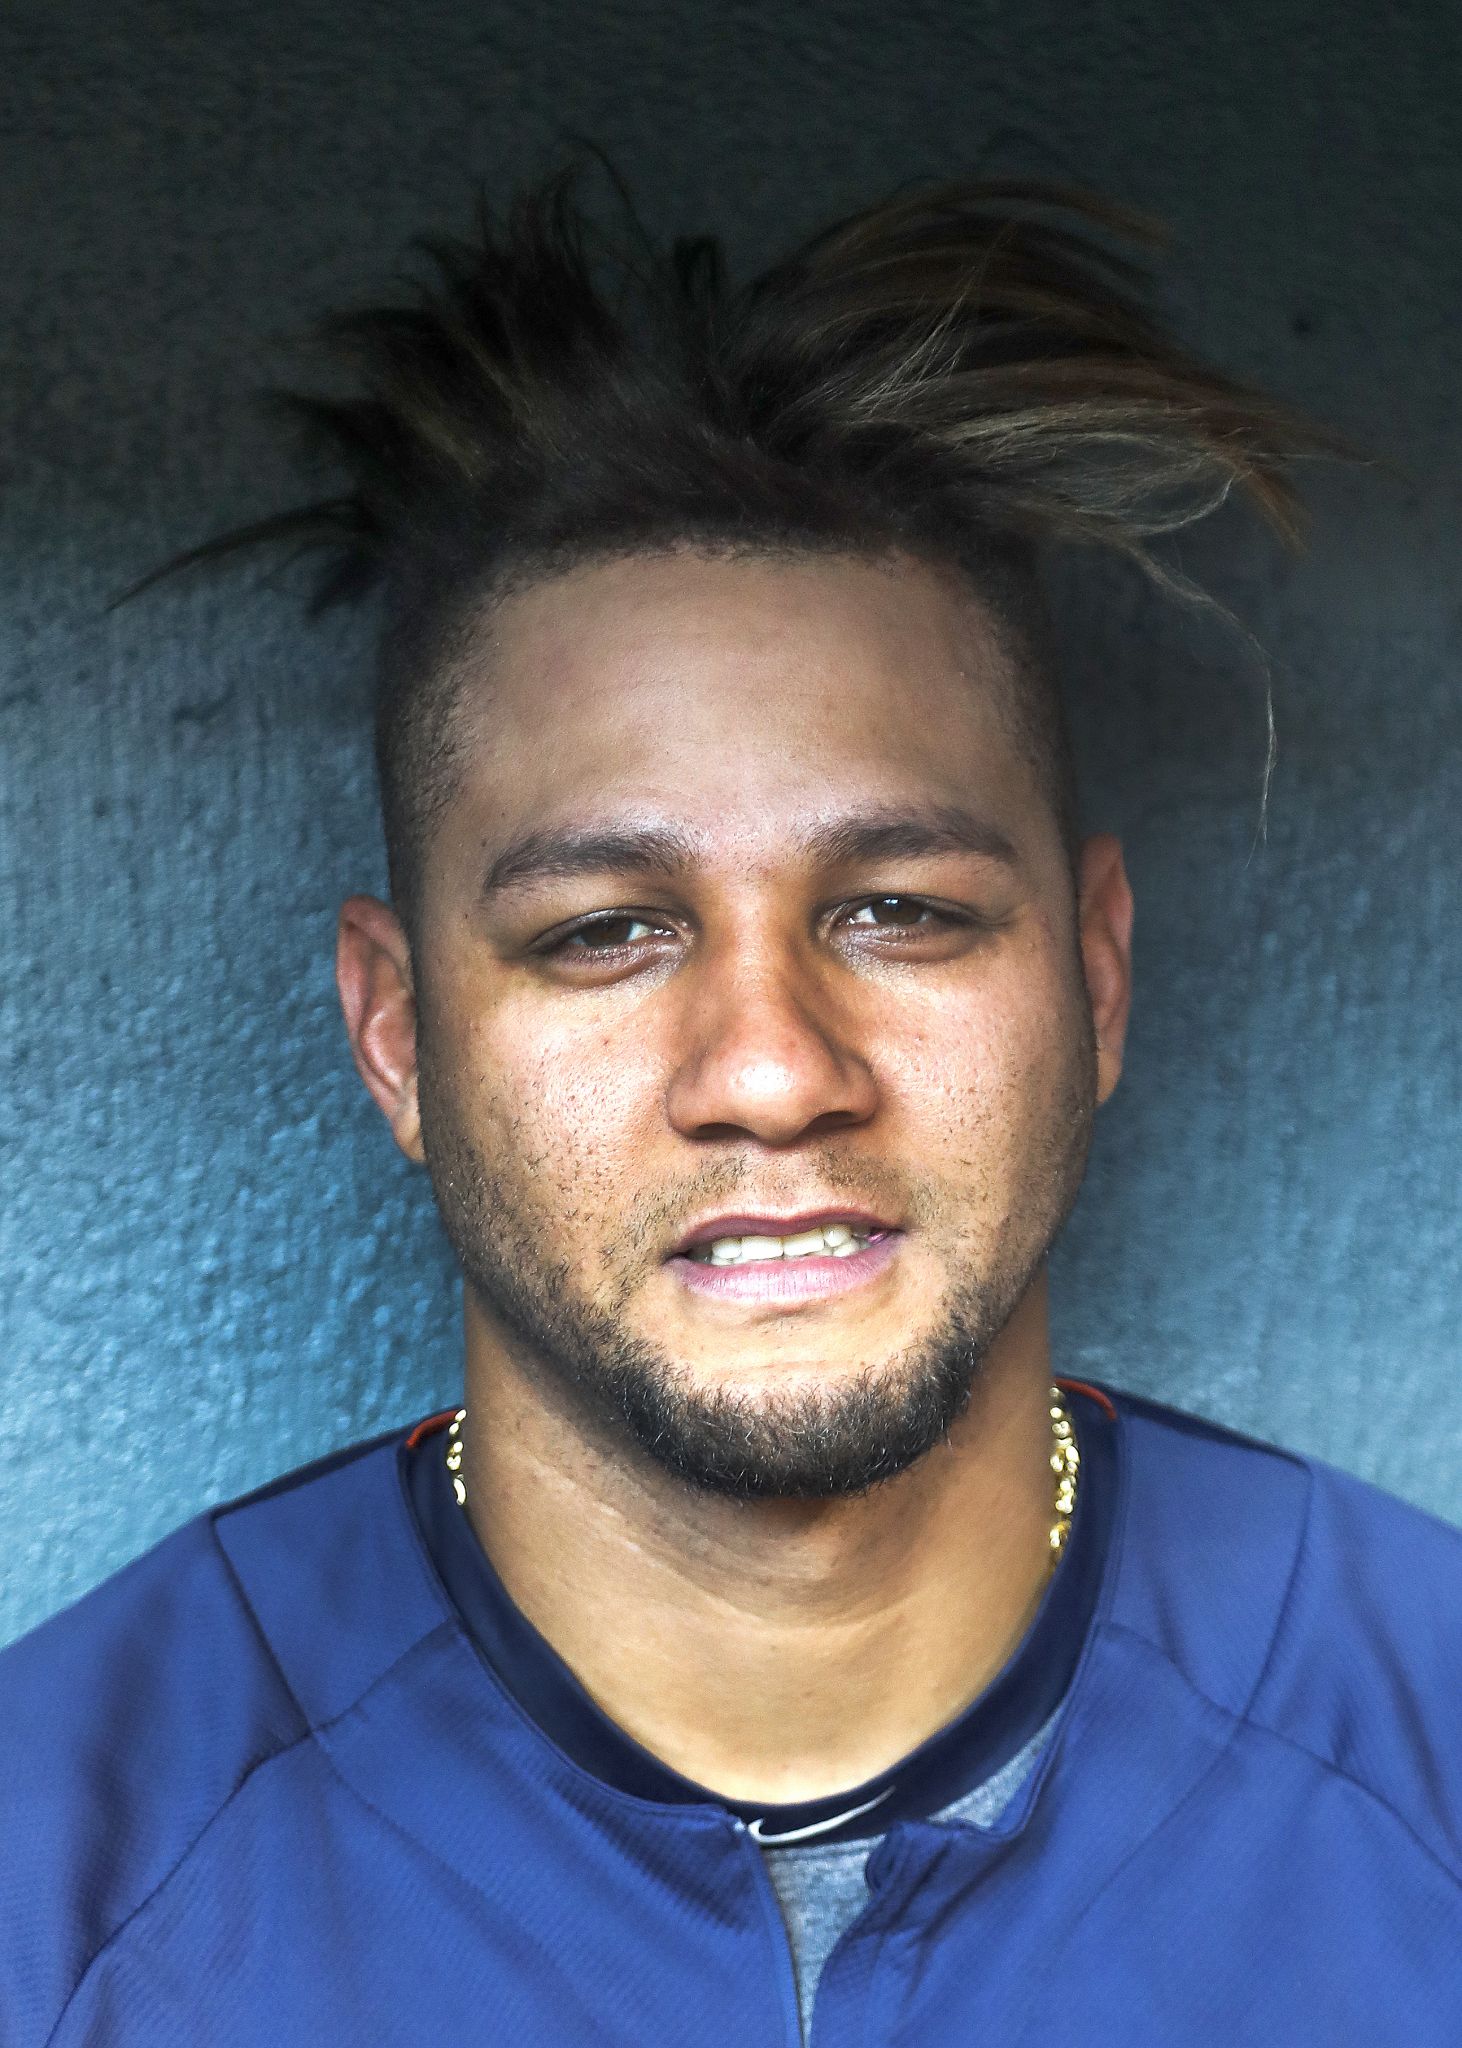 Astros entrust hairstyling needs to man with tonsorial talents